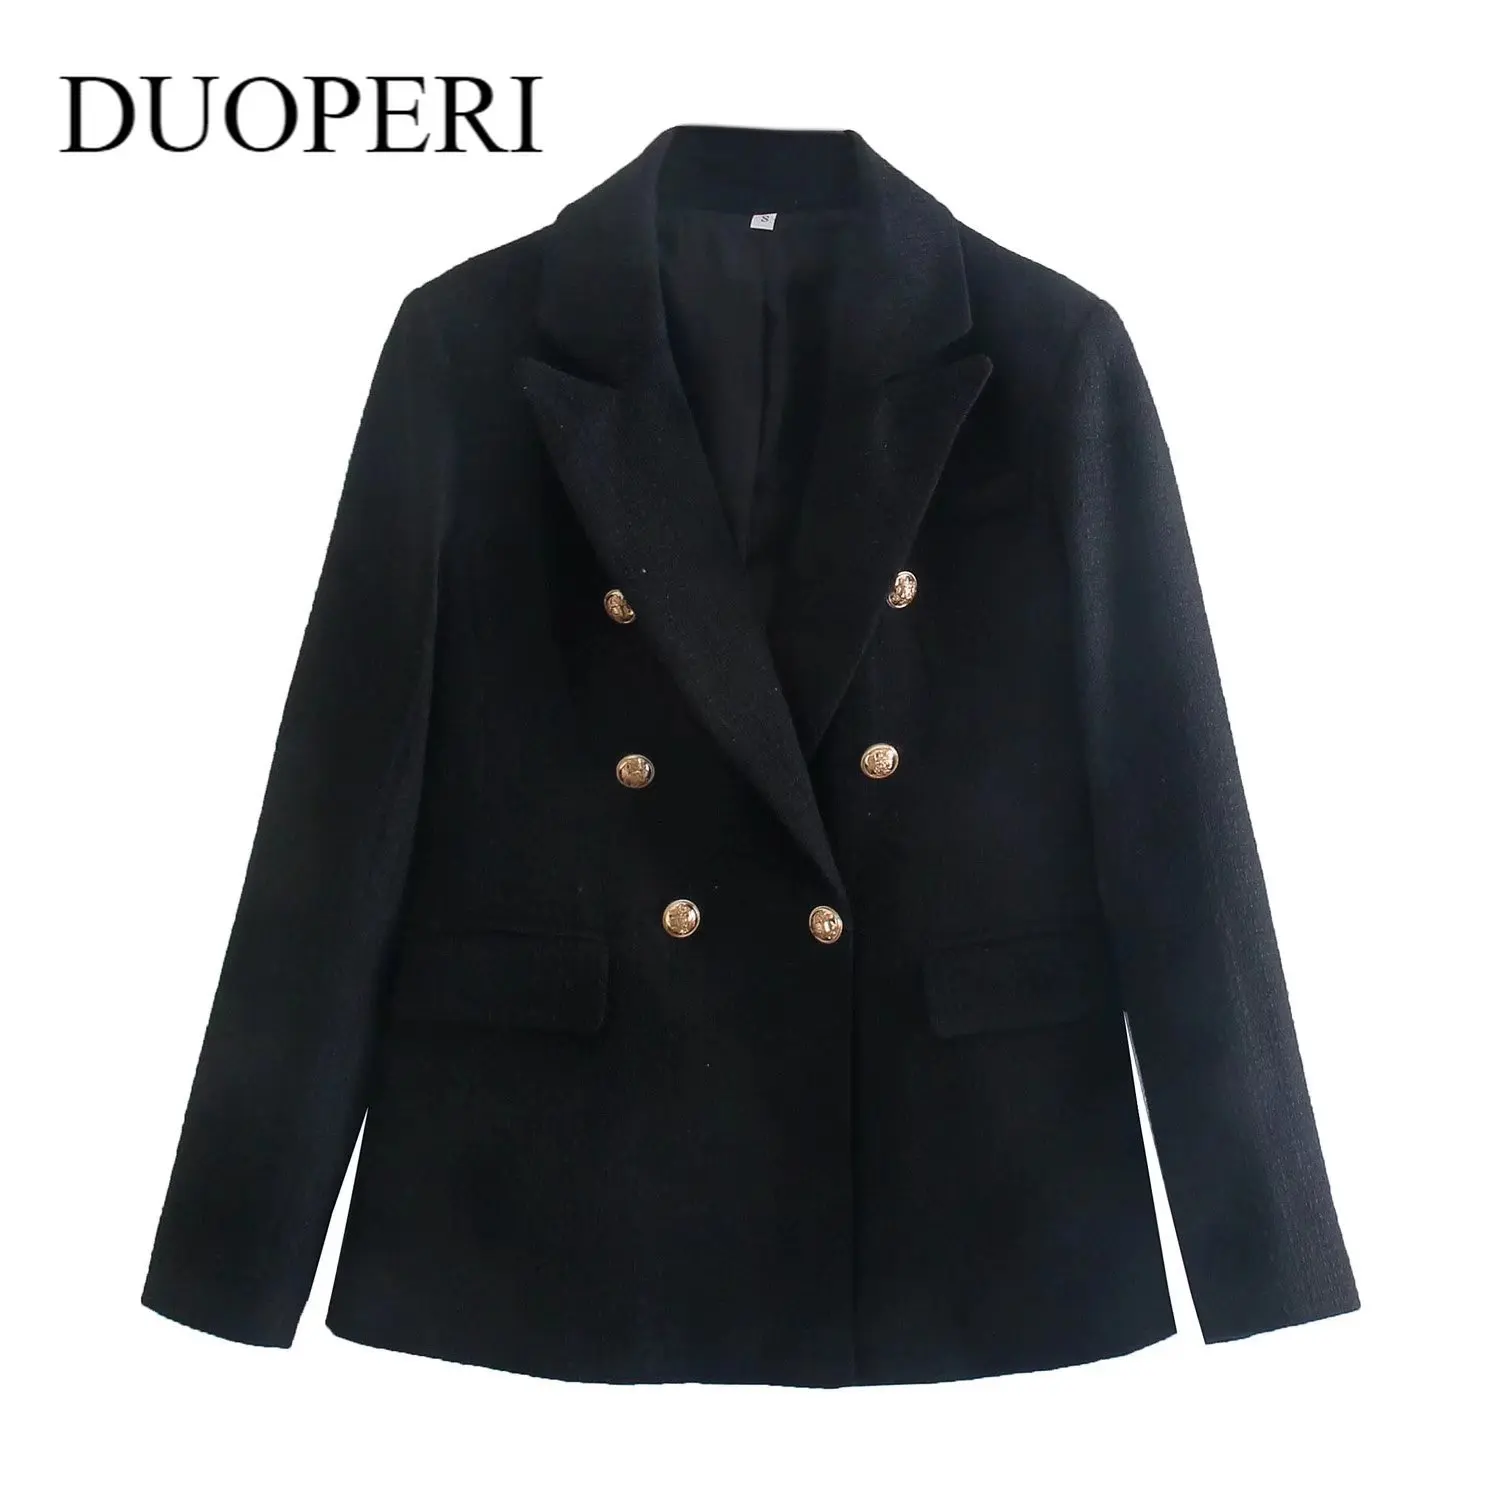 

DUOPERI Women Fashion Textured Blazer with Buttons Details Lapel Collar Long Sleeves Front Flap Pockets Elegant Female Jacket